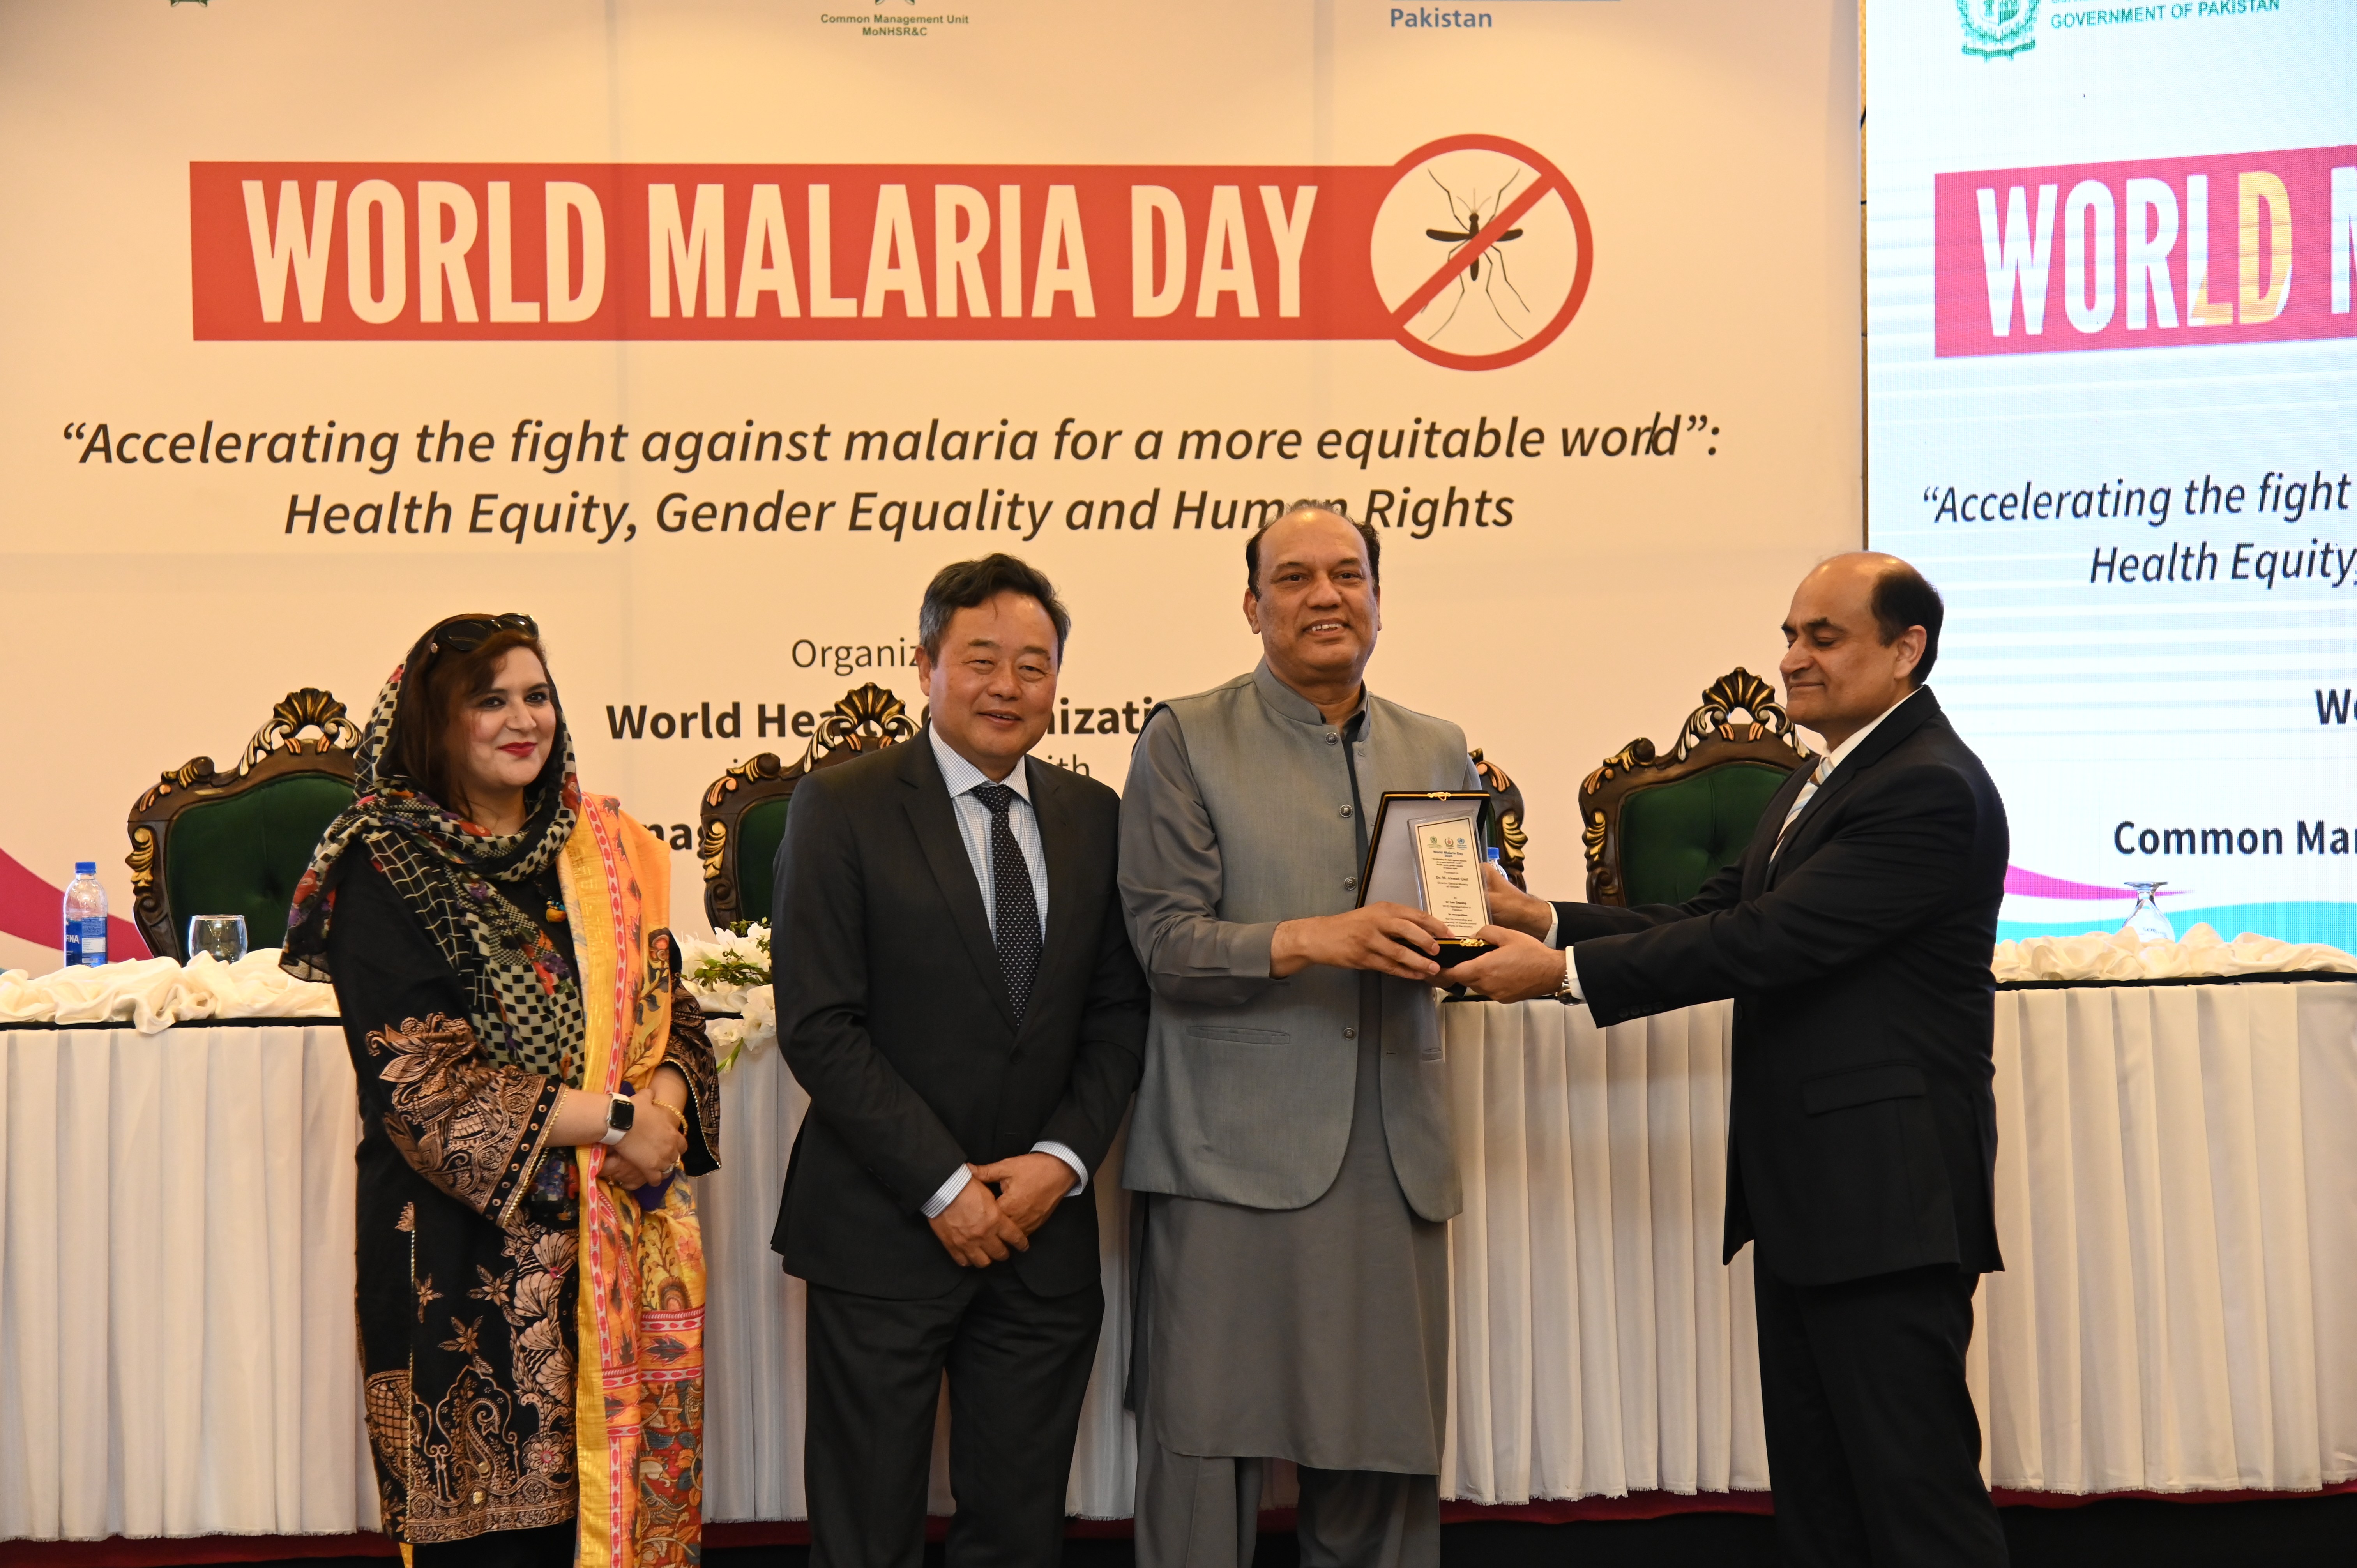 The shield distribution at the event of World Malaria Day 2030